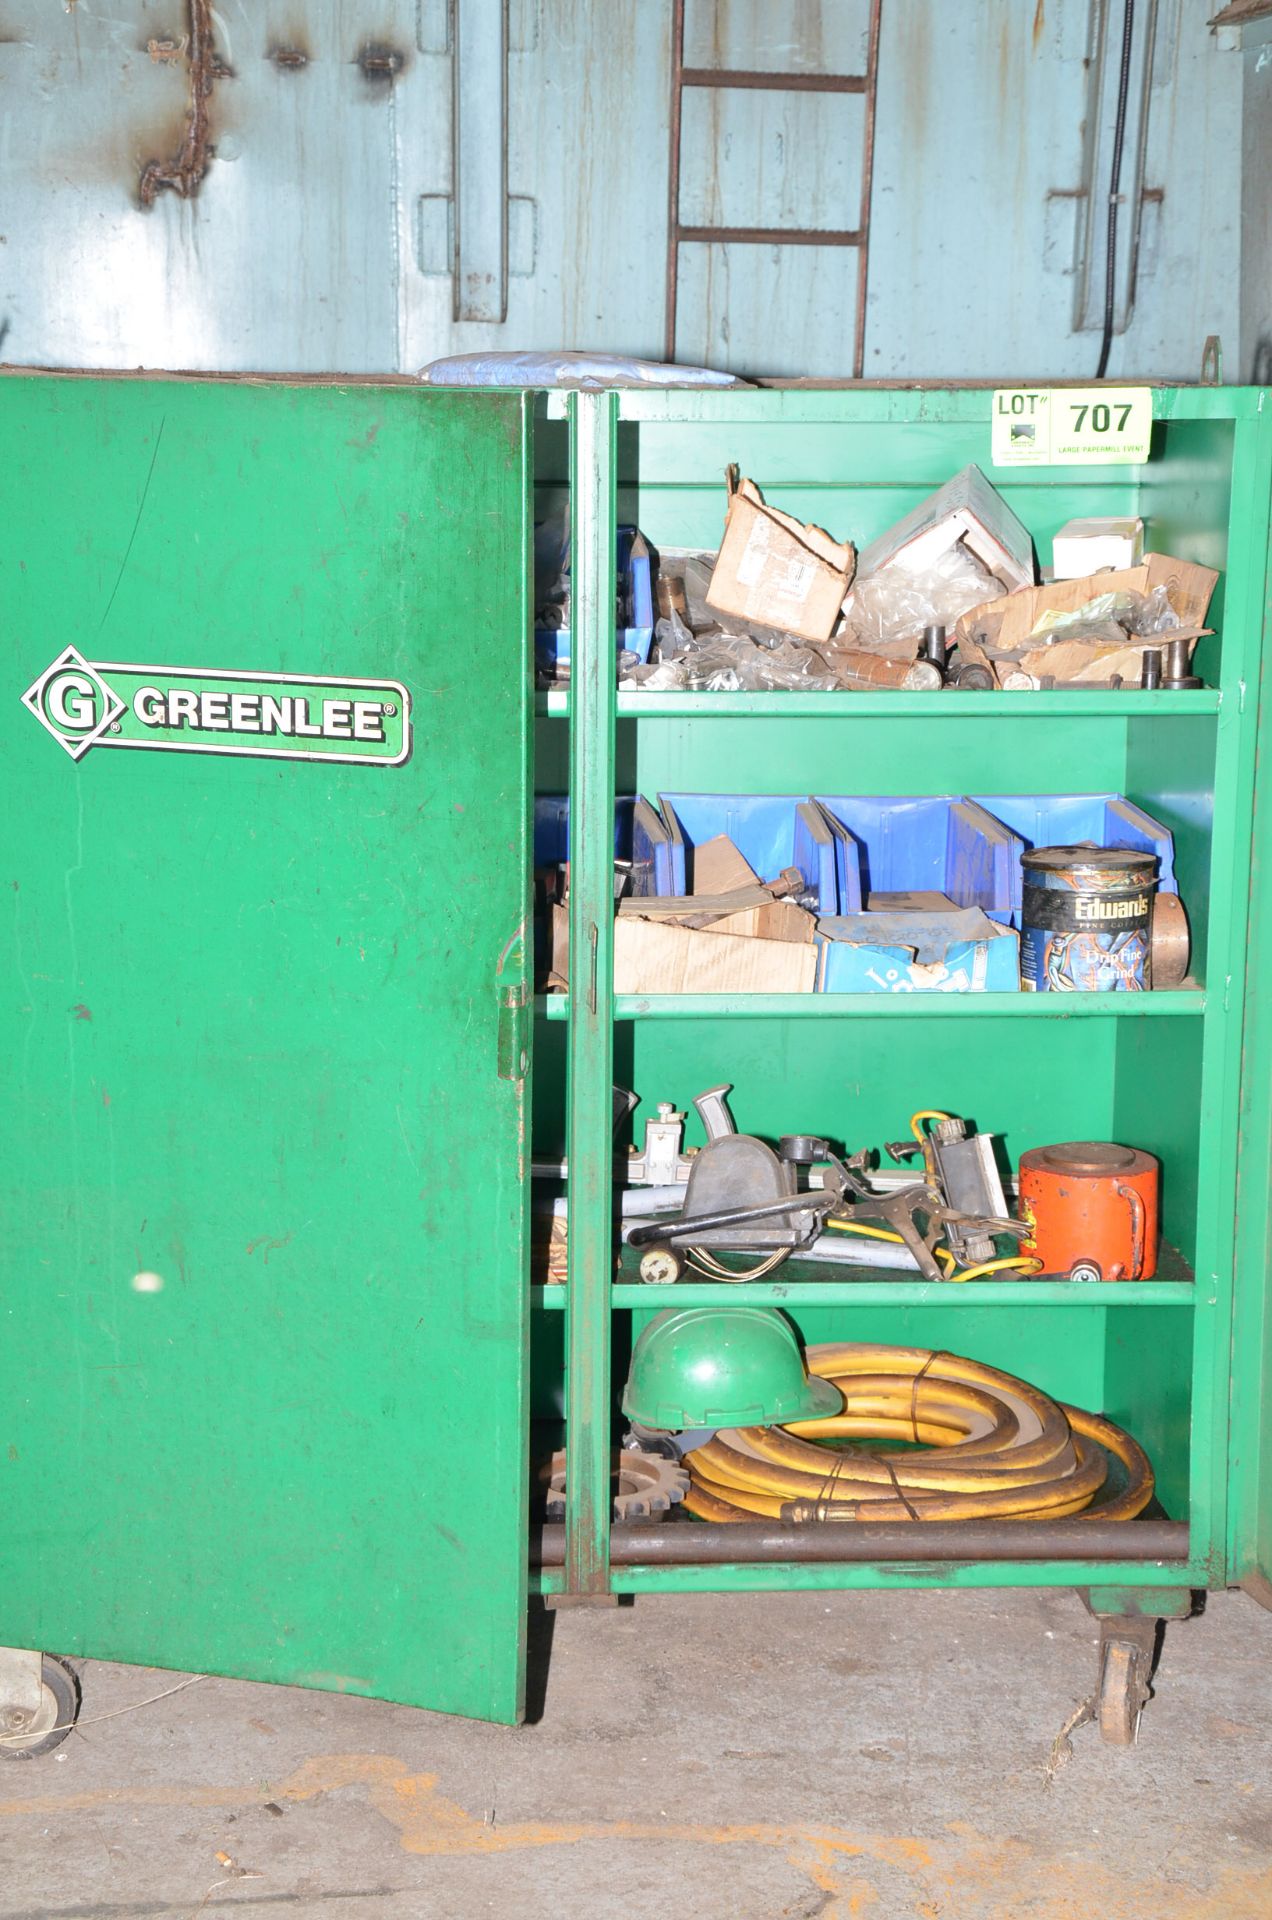 LOT/ GREENLEE ROLLING JOB BOX WITH CONTENTS - TOOLS AND SUPPLIES [RIGGING FEES FOR LOT #707 - $60